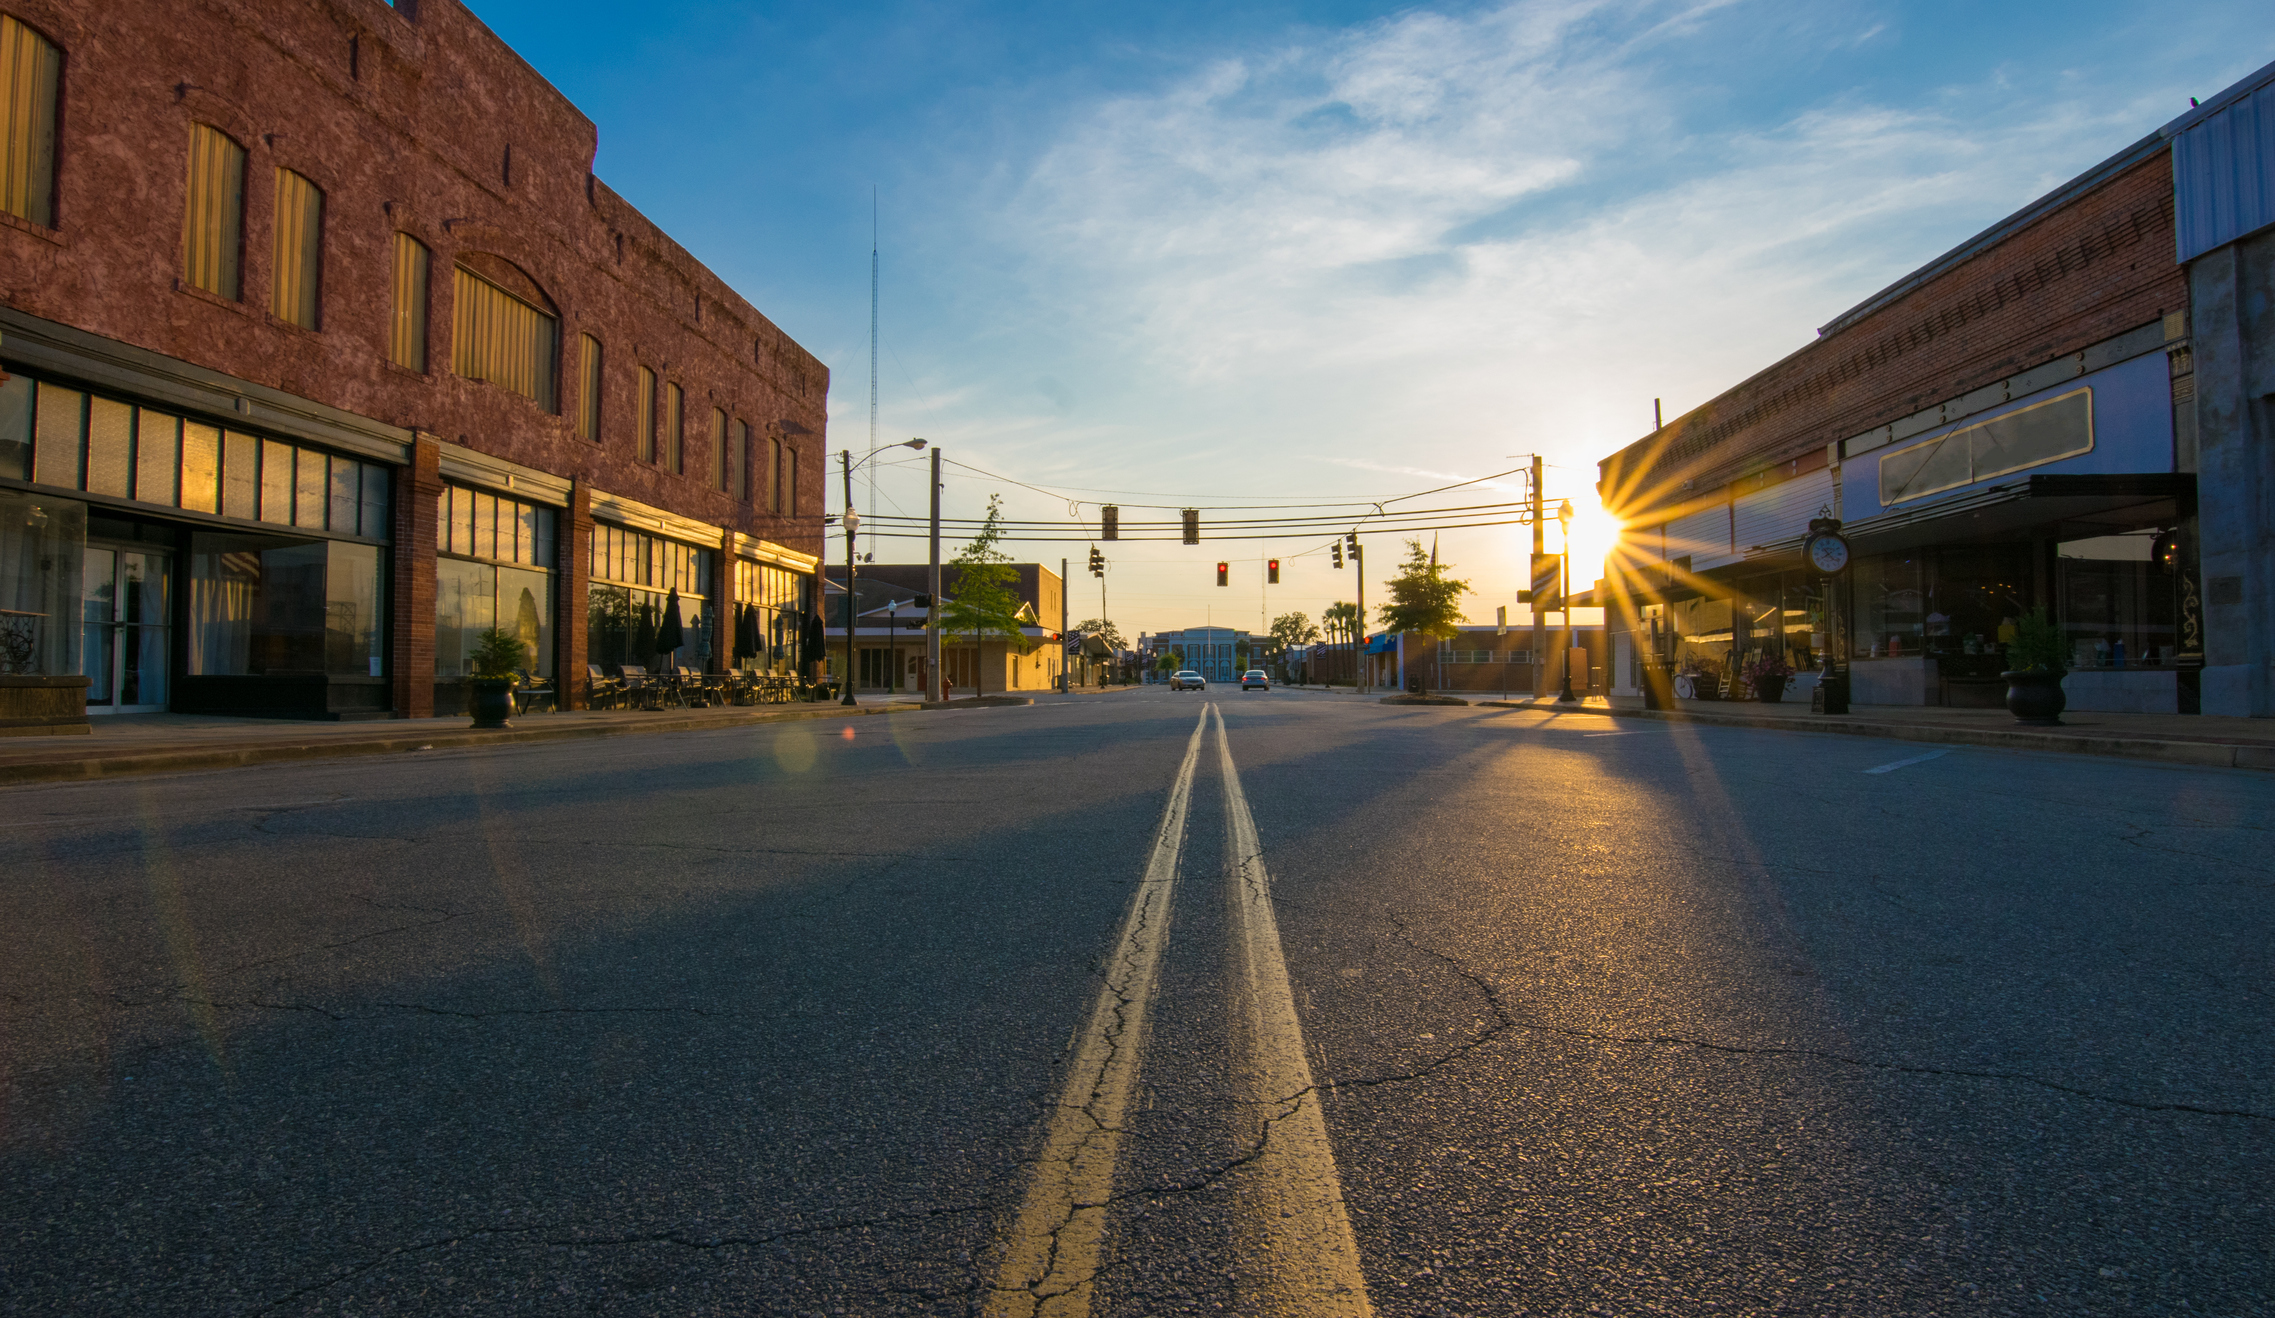 Storefronts at sunset in the middle of the road in downtown in a small town. The street and parking spaces are empty.